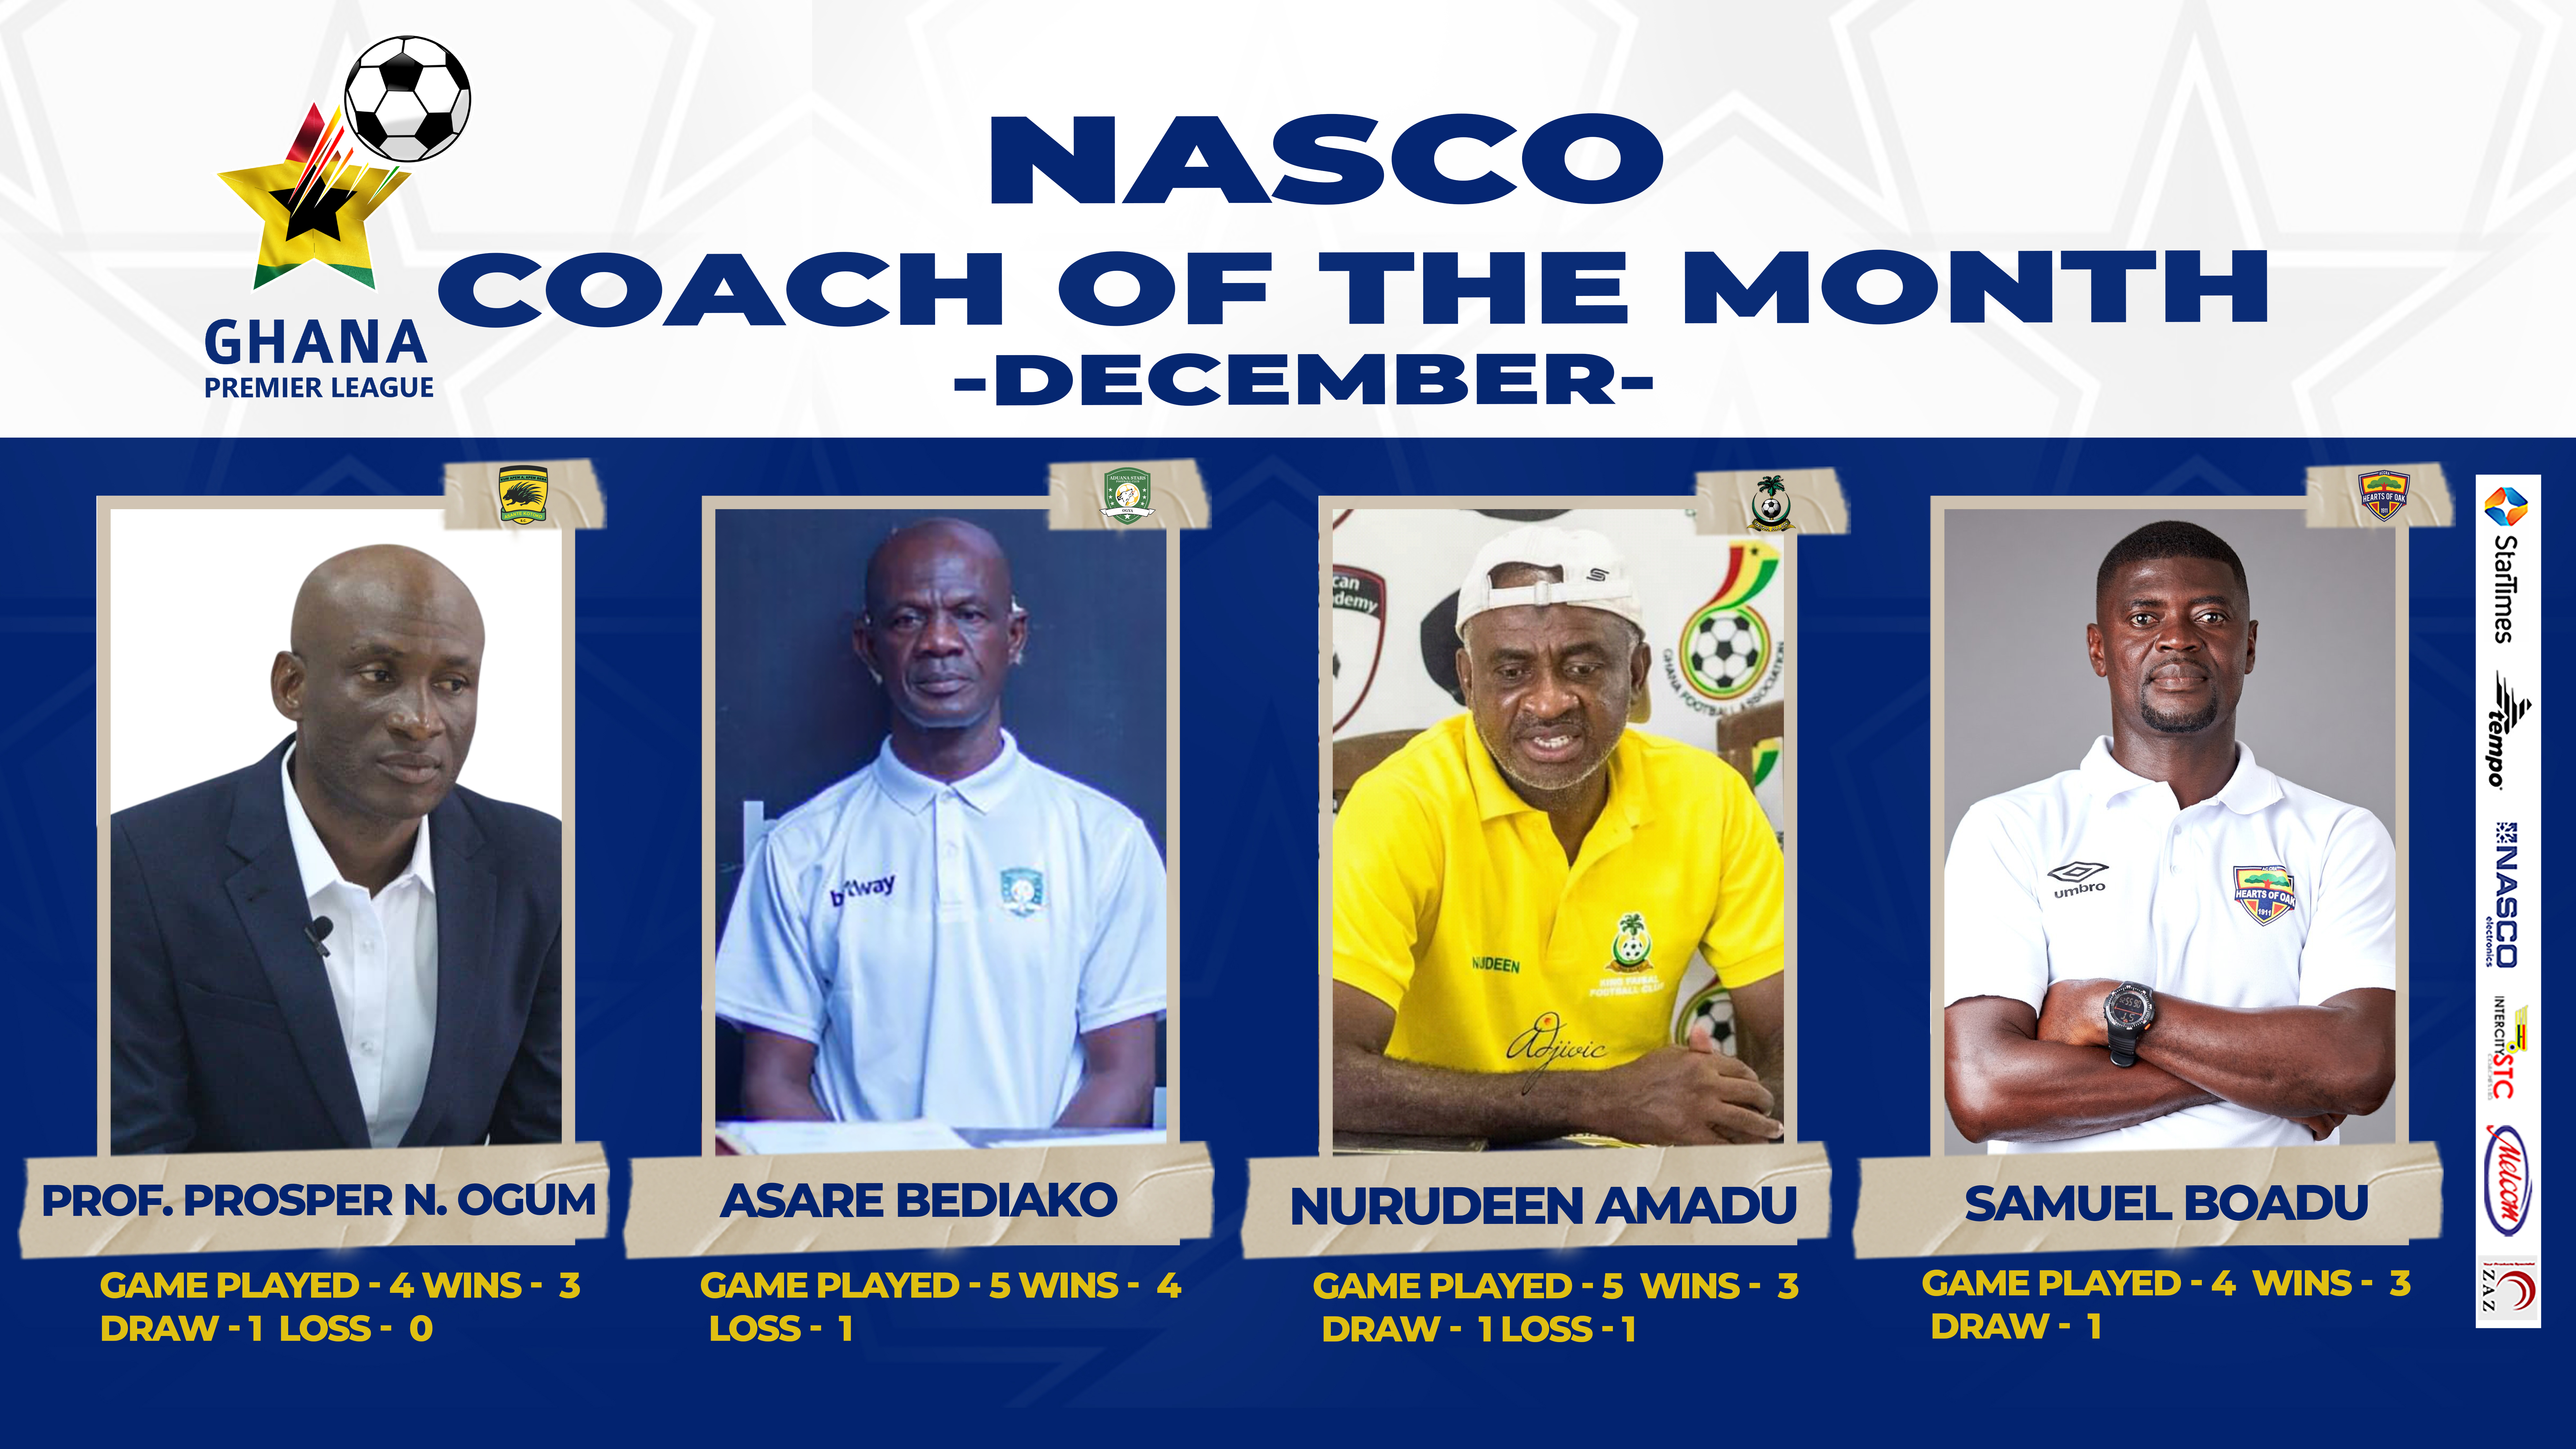 Nominees for NASCO Coach of the Month- December